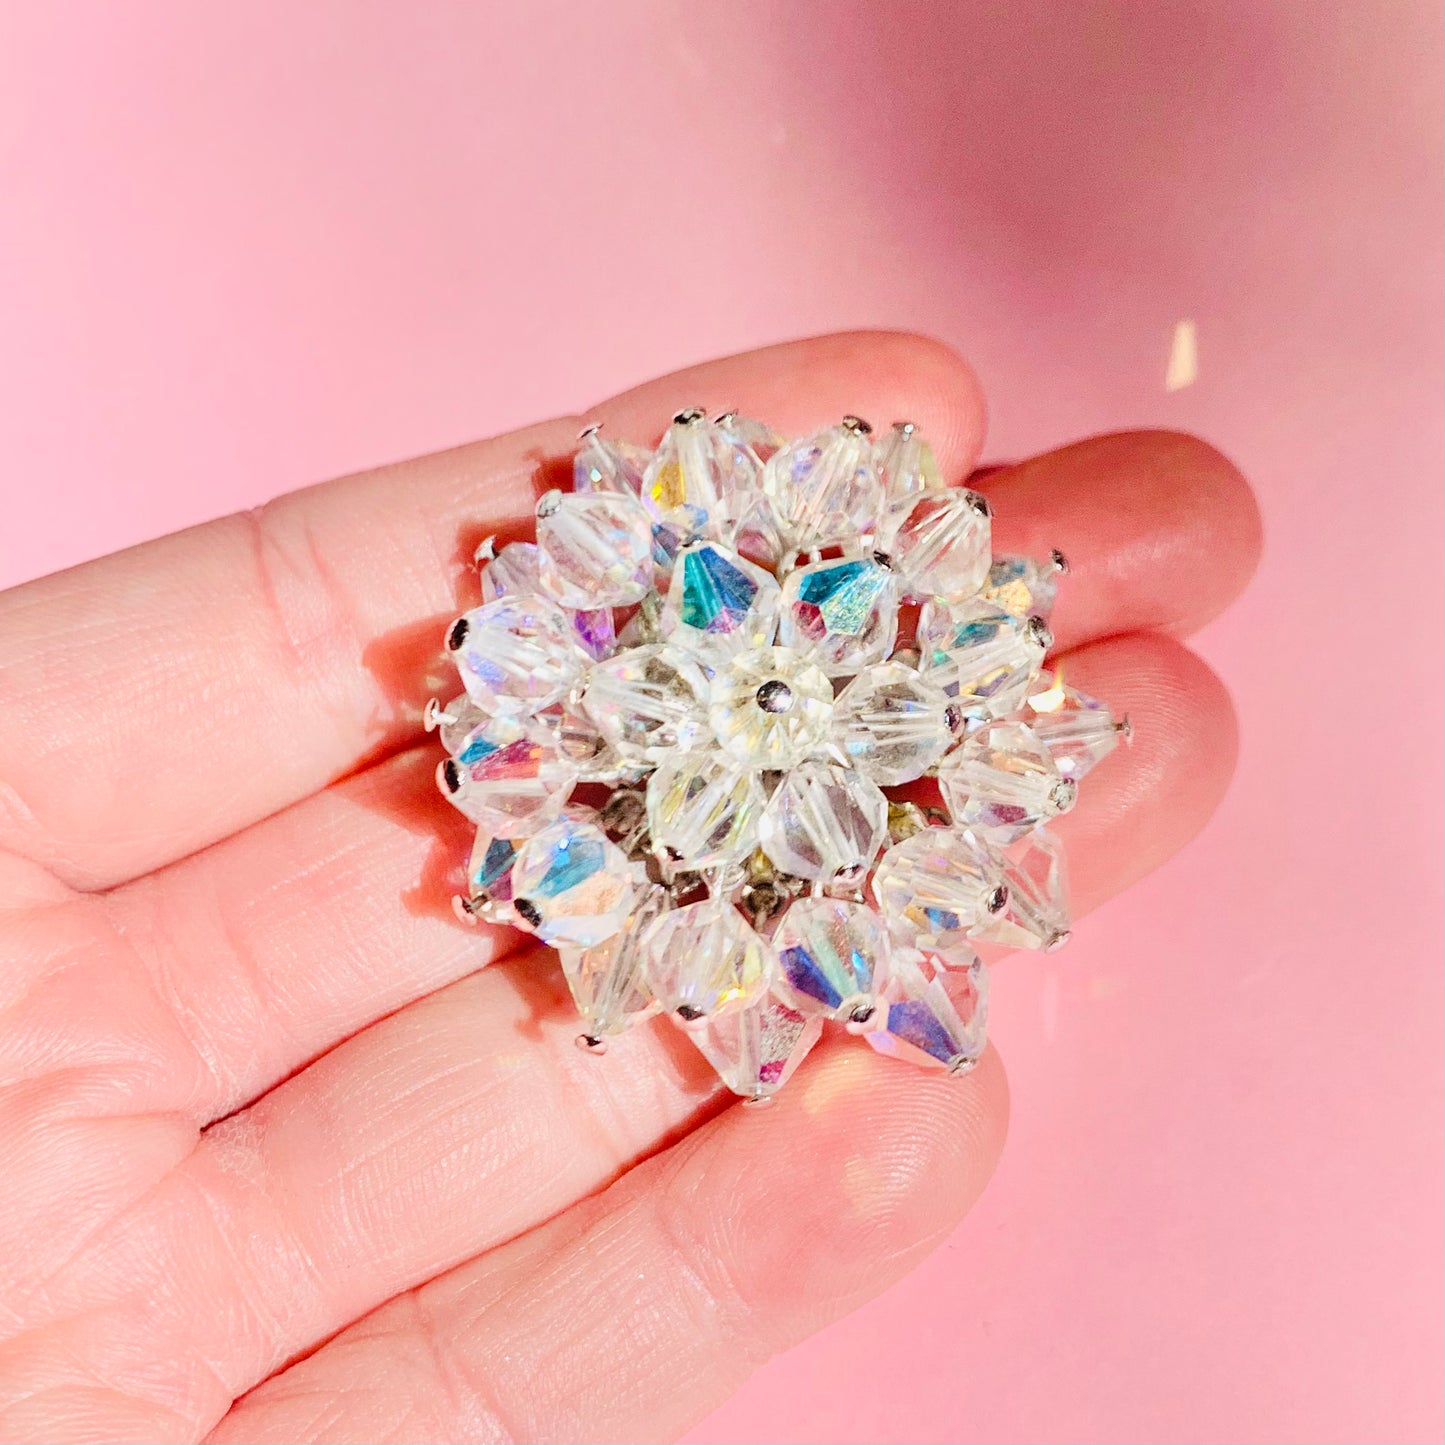 1940s costume flower brooch with clear Swarovski beads